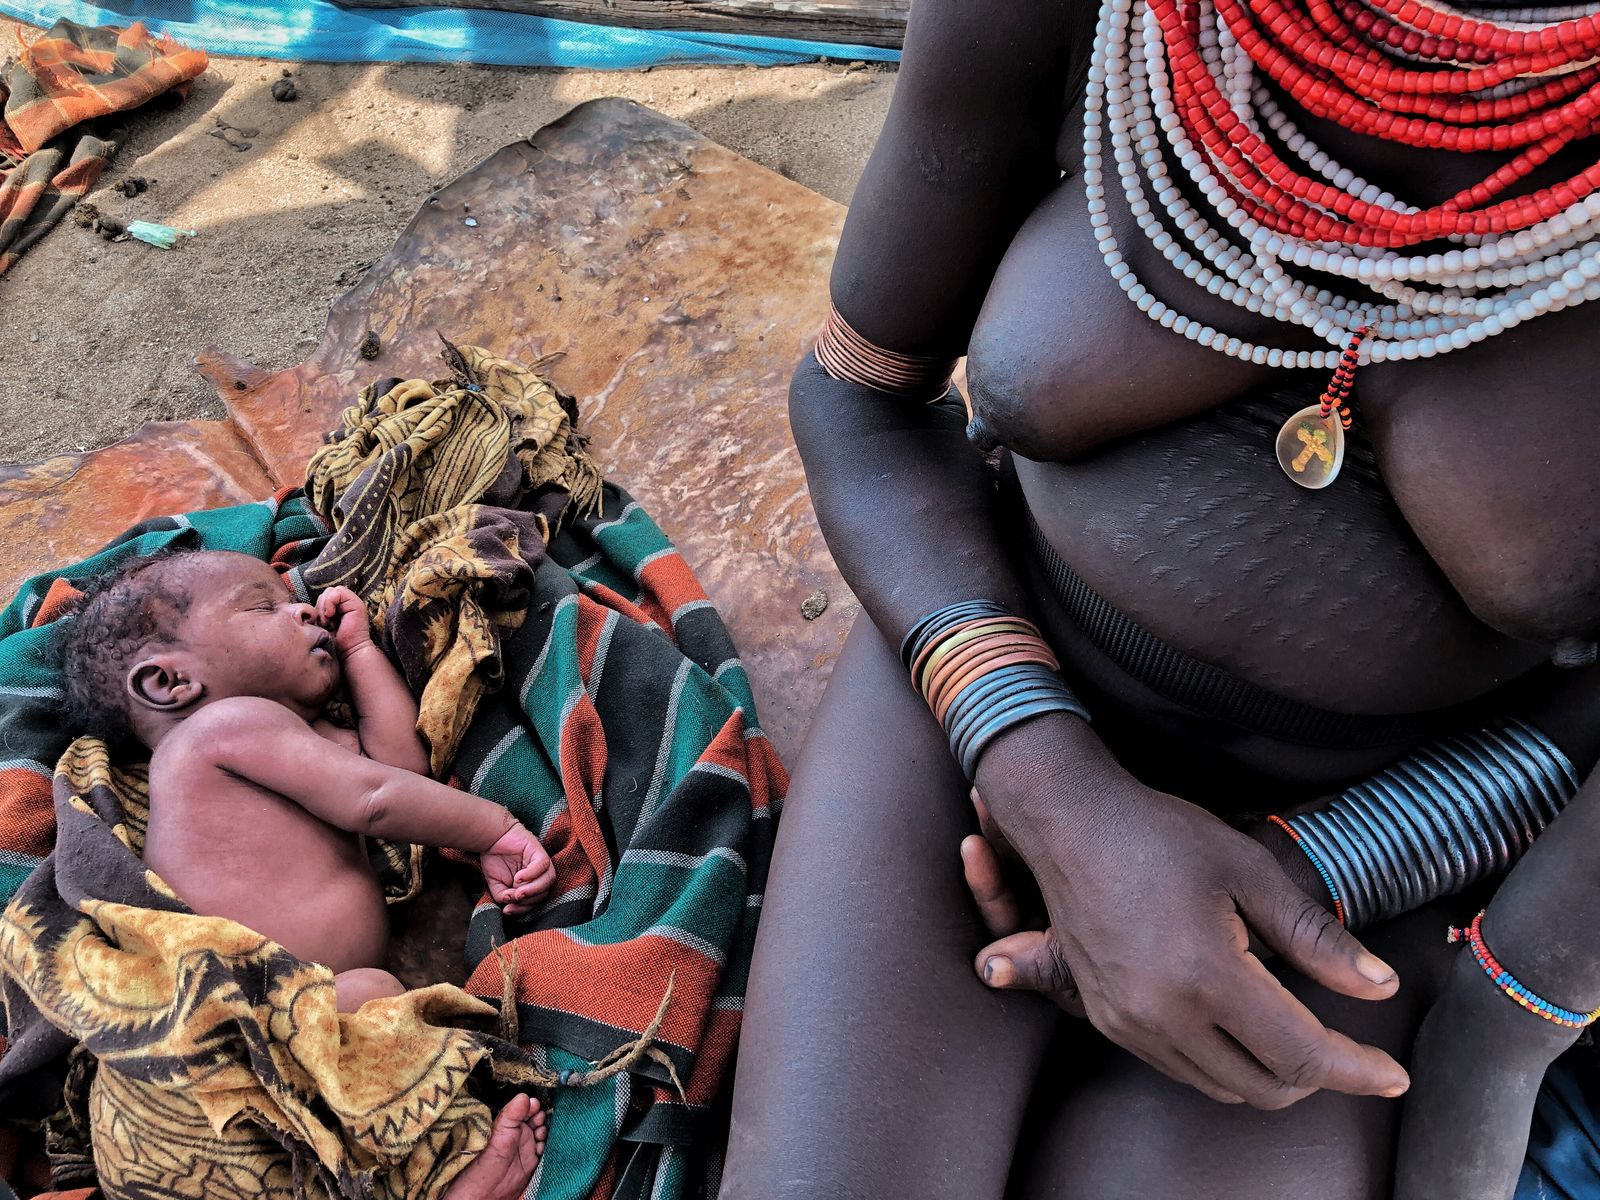 © Nwando Ebeledike - This photo was taken in Omo Valley, Ethiopia and is a photo of a mother and her day old child